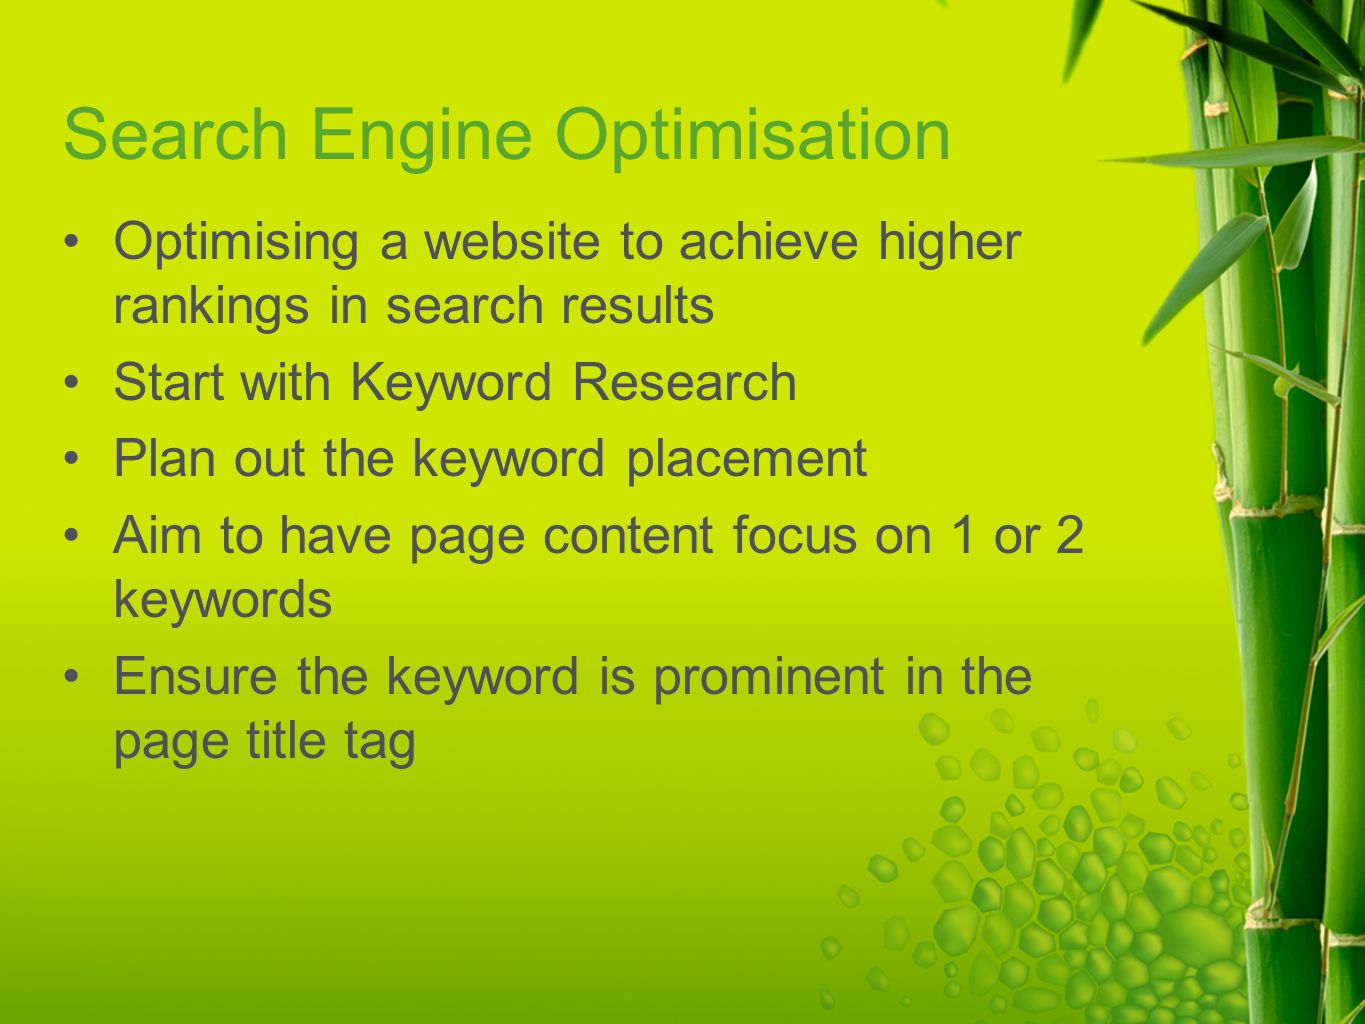 Search Engine Optimisation Optimising a website to achieve higher rankings in search results Start with Keyword Research Plan out the keyword placement Aim to have page content focus on 1 or 2 keywords Ensure the keyword is prominent in the page title tag